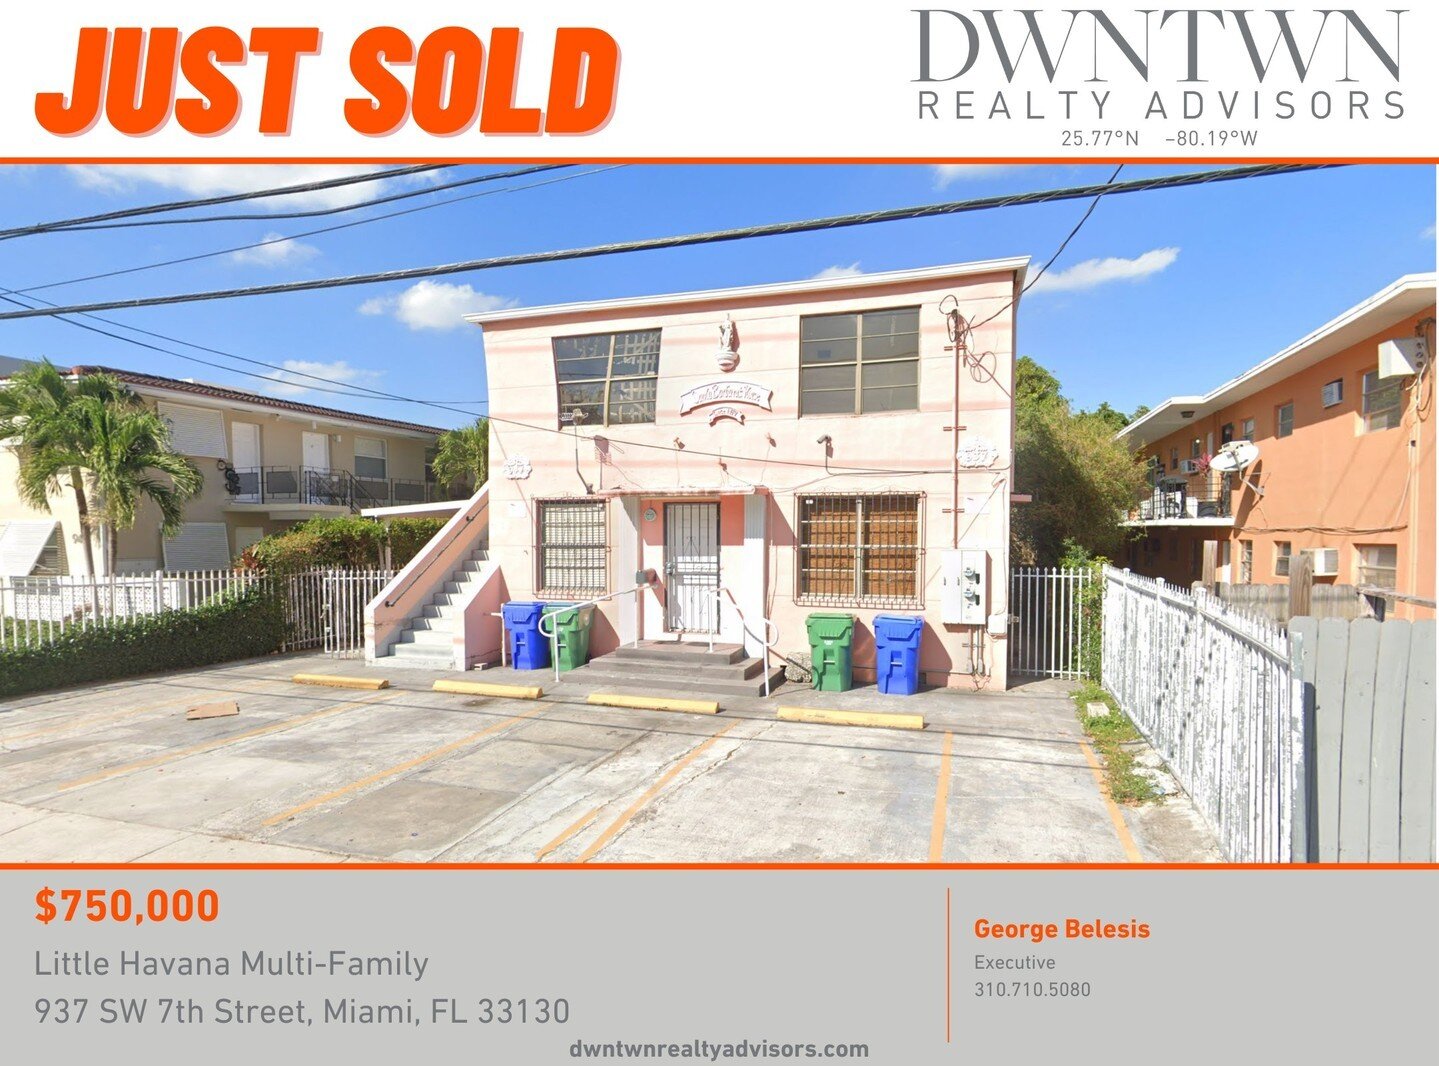 JUST SOLD FOR $750,000 | Little Havana Redevelopment Project

DWNTWN Realty Advisors is pleased to announce the successful sale of 937 SW 7th Street, a 7,500 SF lot in Little Havana aimed for redevelopment. Iris Padron &amp; Rodolfo Valdes of Power O